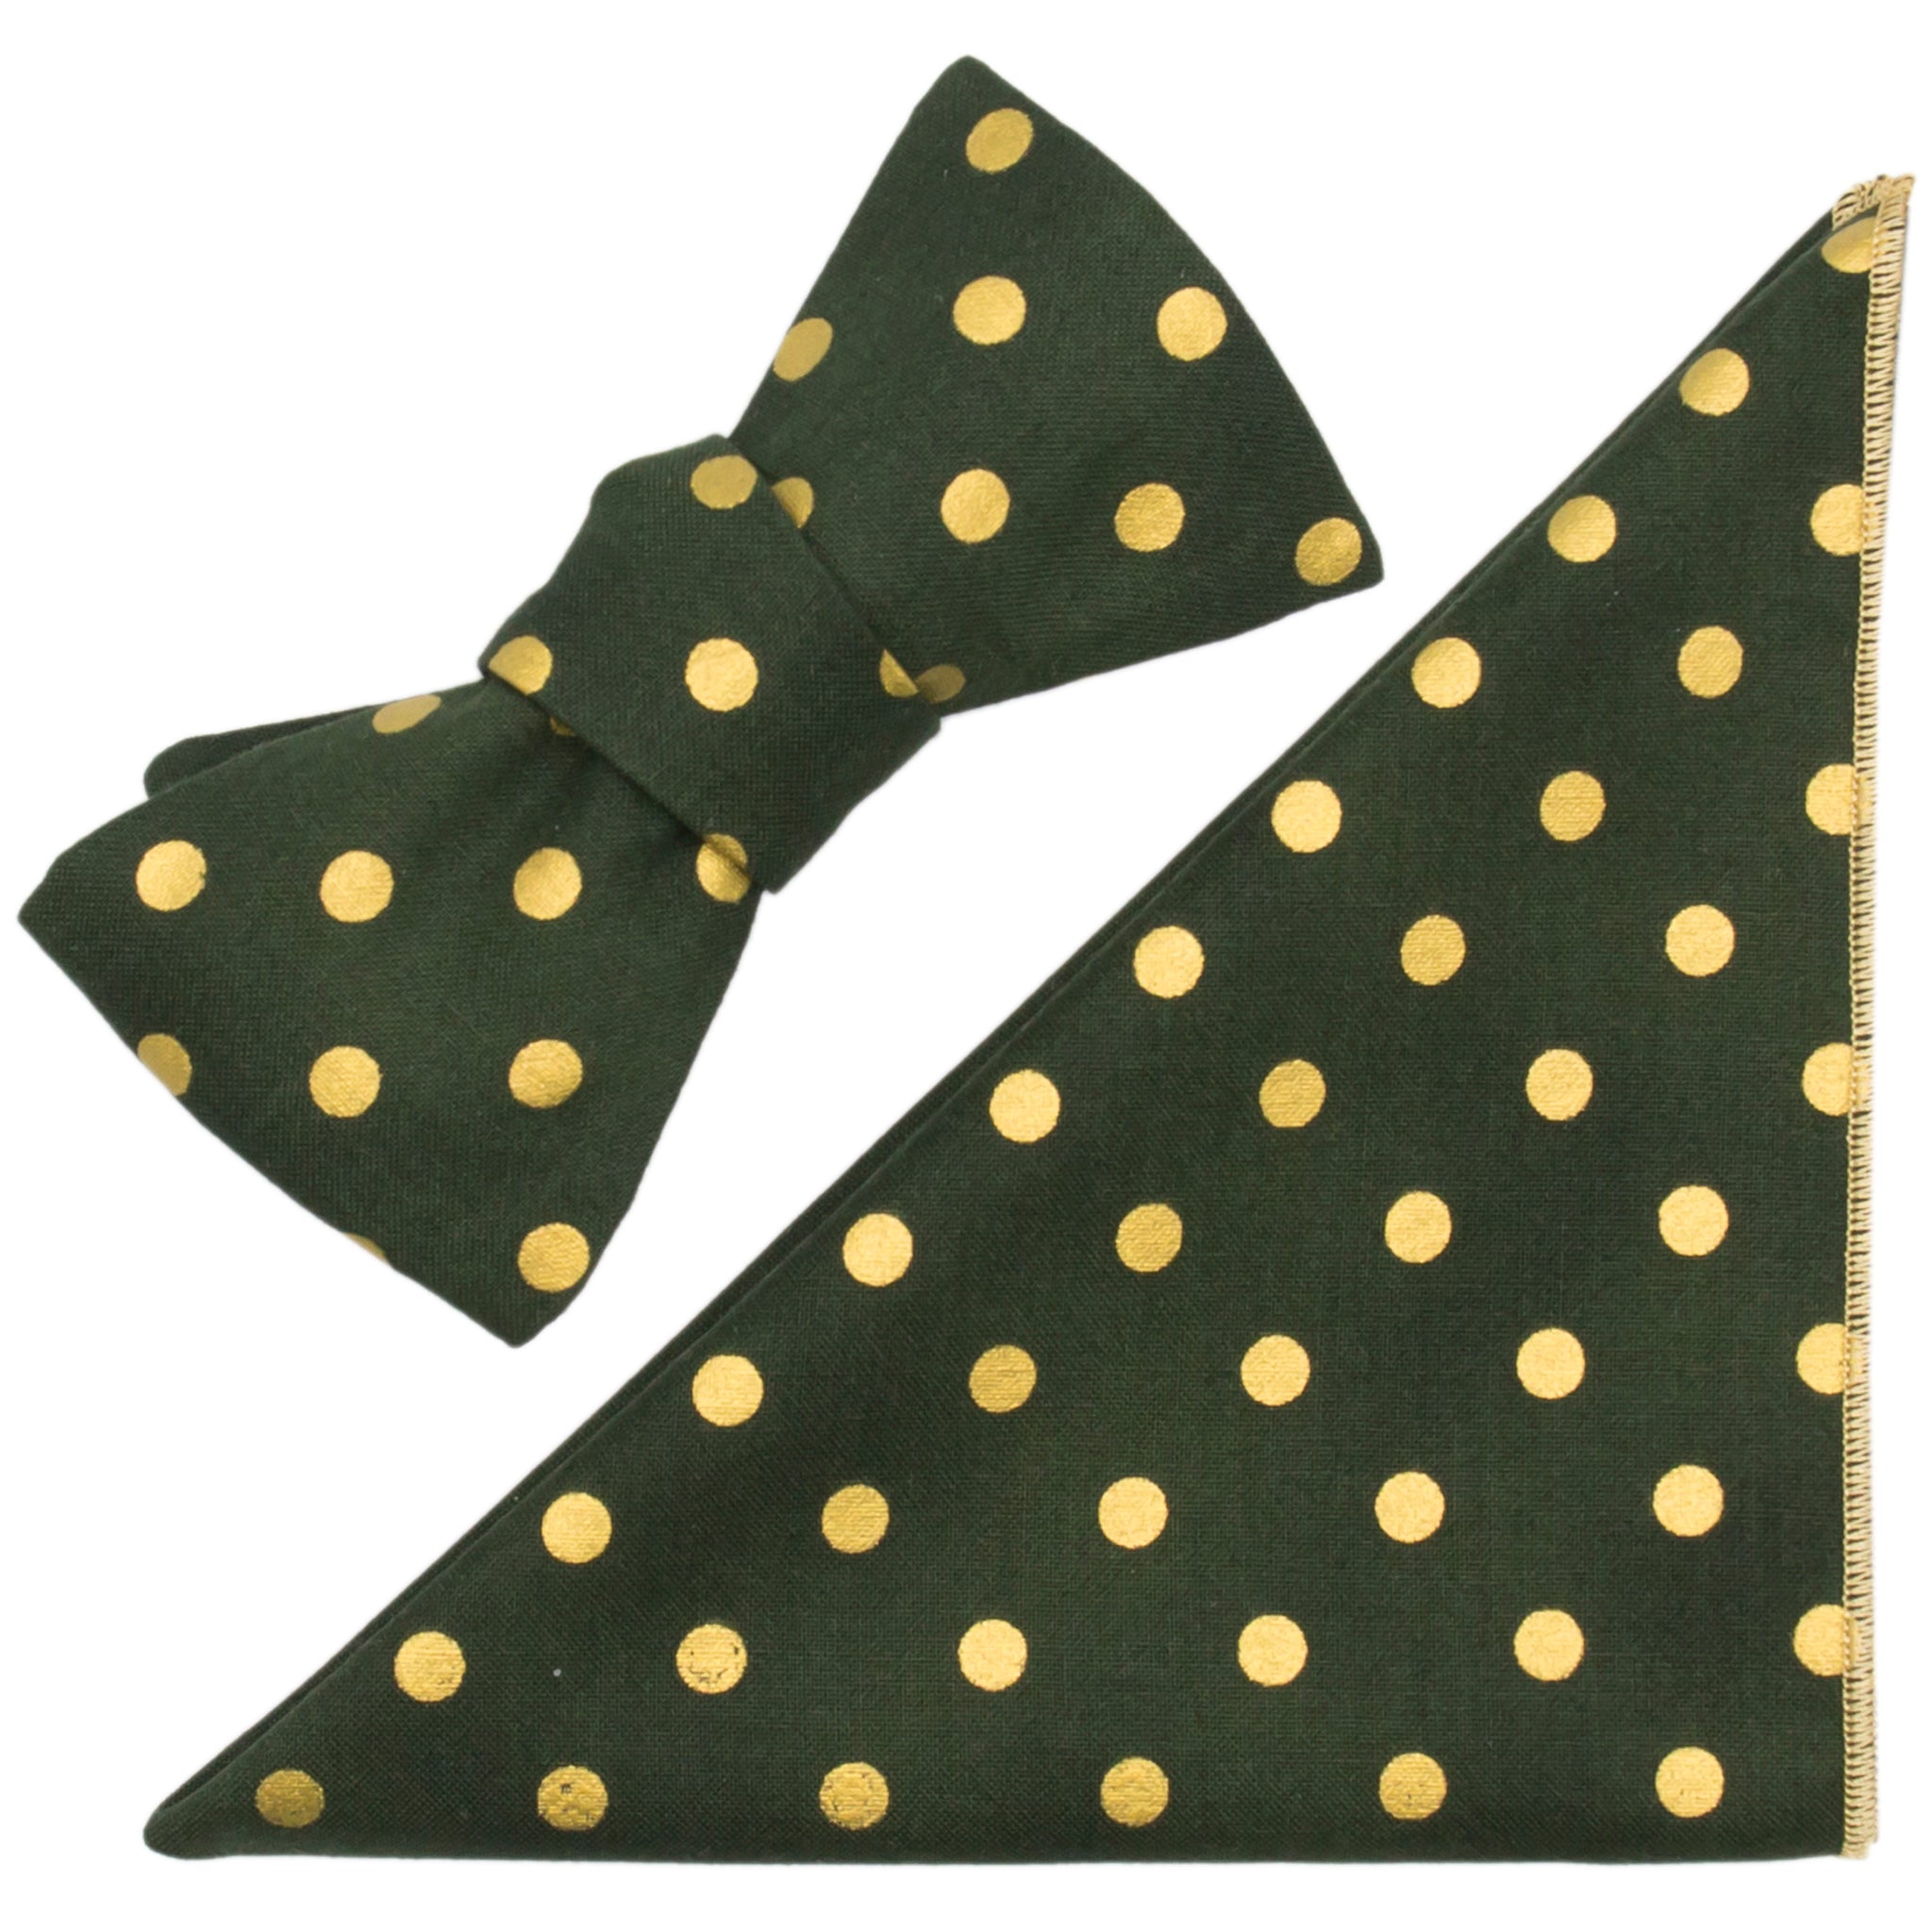 Green & Metallic Gold Polka Dot Cotton Bow Tie and Pocket Square Made in Canada